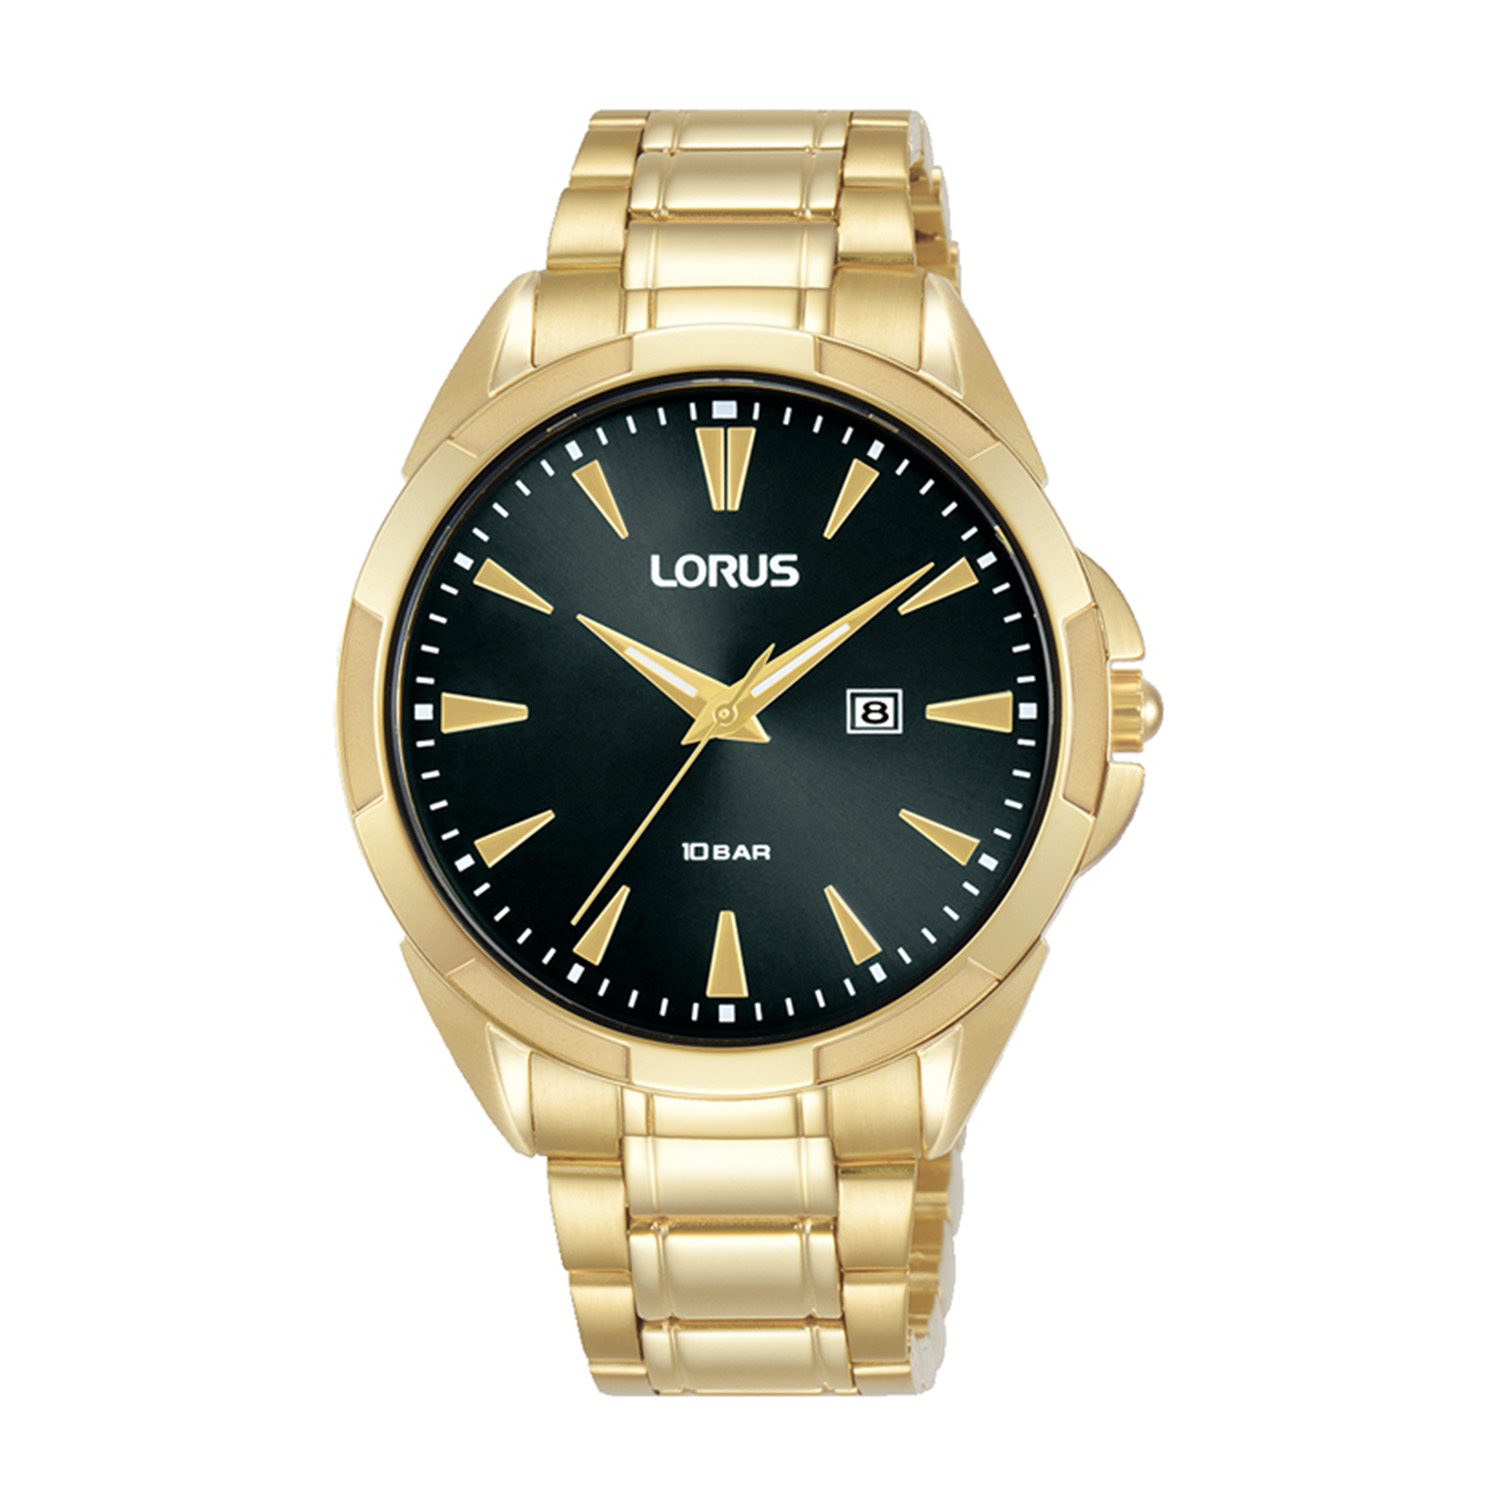 Womens watch LORUS made of gold stainless steel with black dial and bracelet.